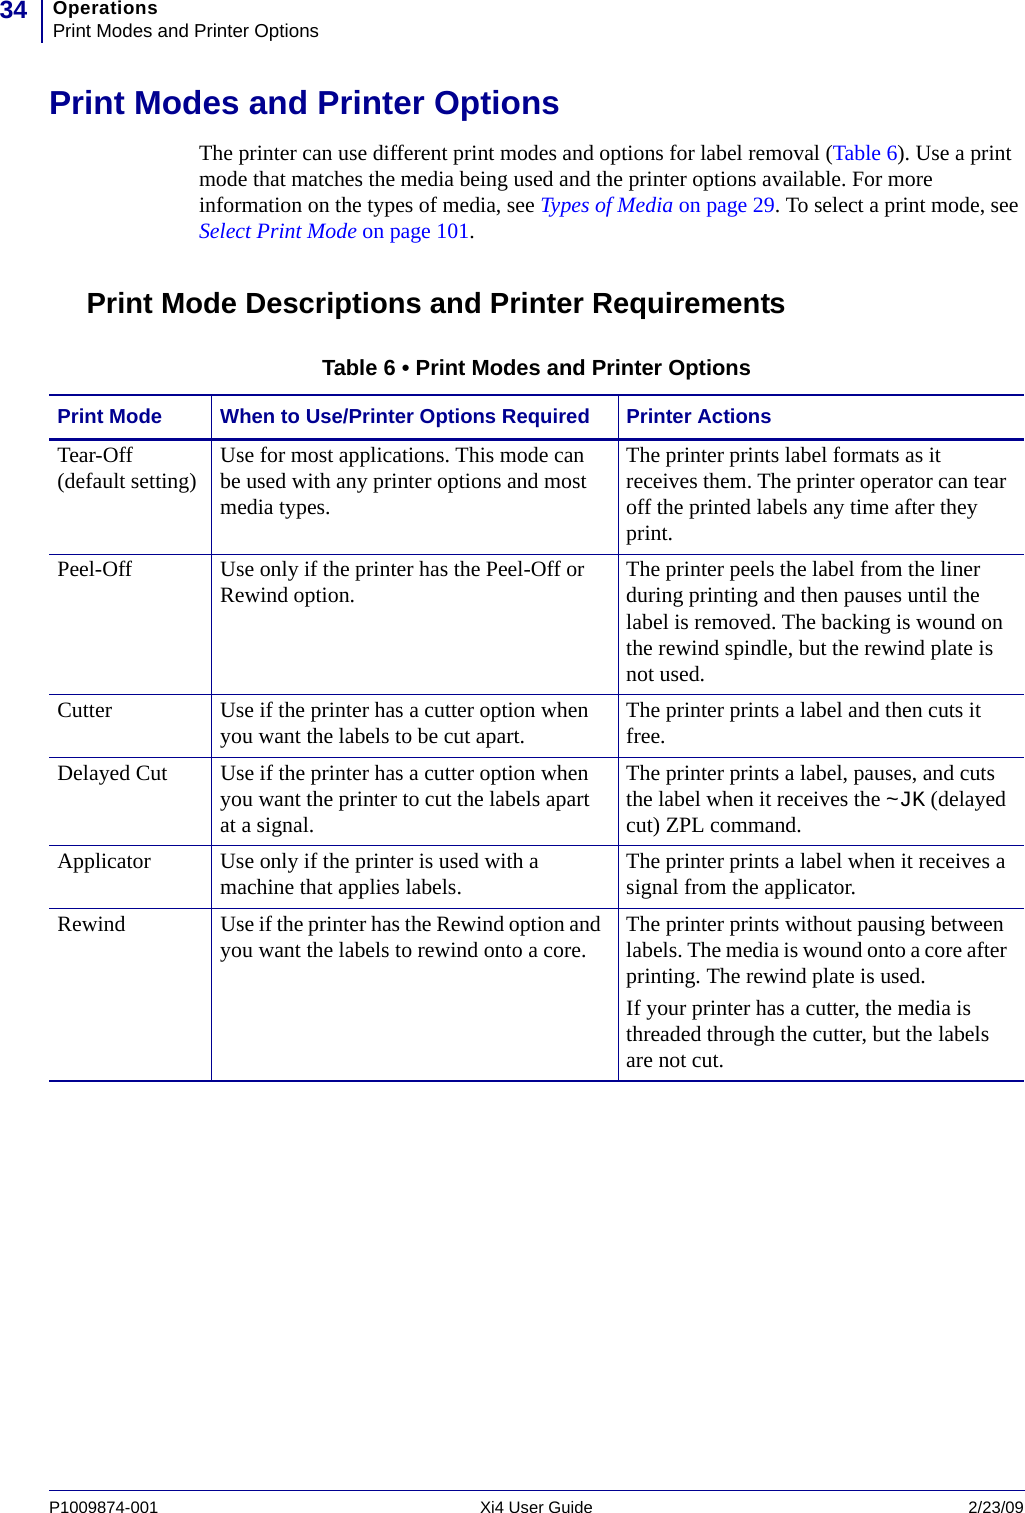 OperationsPrint Modes and Printer Options34P1009874-001   Xi4 User Guide 2/23/09Print Modes and Printer OptionsThe printer can use different print modes and options for label removal (Table 6). Use a print mode that matches the media being used and the printer options available. For more information on the types of media, see Types of Media on page 29. To select a print mode, see Select Print Mode on page 101.Print Mode Descriptions and Printer RequirementsTable 6 • Print Modes and Printer OptionsPrint Mode When to Use/Printer Options Required Printer ActionsTear-Off (default setting) Use for most applications. This mode can be used with any printer options and most media types.The printer prints label formats as it receives them. The printer operator can tear off the printed labels any time after they print.Peel-Off Use only if the printer has the Peel-Off or Rewind option. The printer peels the label from the liner during printing and then pauses until the label is removed. The backing is wound on the rewind spindle, but the rewind plate is not used.Cutter Use if the printer has a cutter option when you want the labels to be cut apart. The printer prints a label and then cuts it free.Delayed Cut Use if the printer has a cutter option when you want the printer to cut the labels apart at a signal.The printer prints a label, pauses, and cuts the label when it receives the ~JK (delayed cut) ZPL command.Applicator Use only if the printer is used with a machine that applies labels. The printer prints a label when it receives a signal from the applicator.Rewind Use if the printer has the Rewind option and you want the labels to rewind onto a core. The printer prints without pausing between labels. The media is wound onto a core after printing. The rewind plate is used. If your printer has a cutter, the media is threaded through the cutter, but the labels are not cut. 